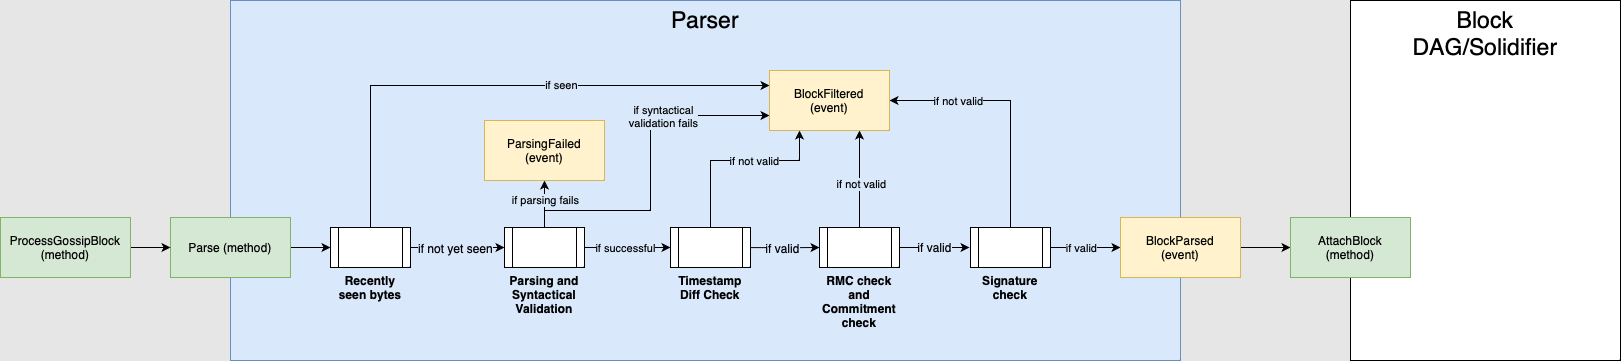 The parser